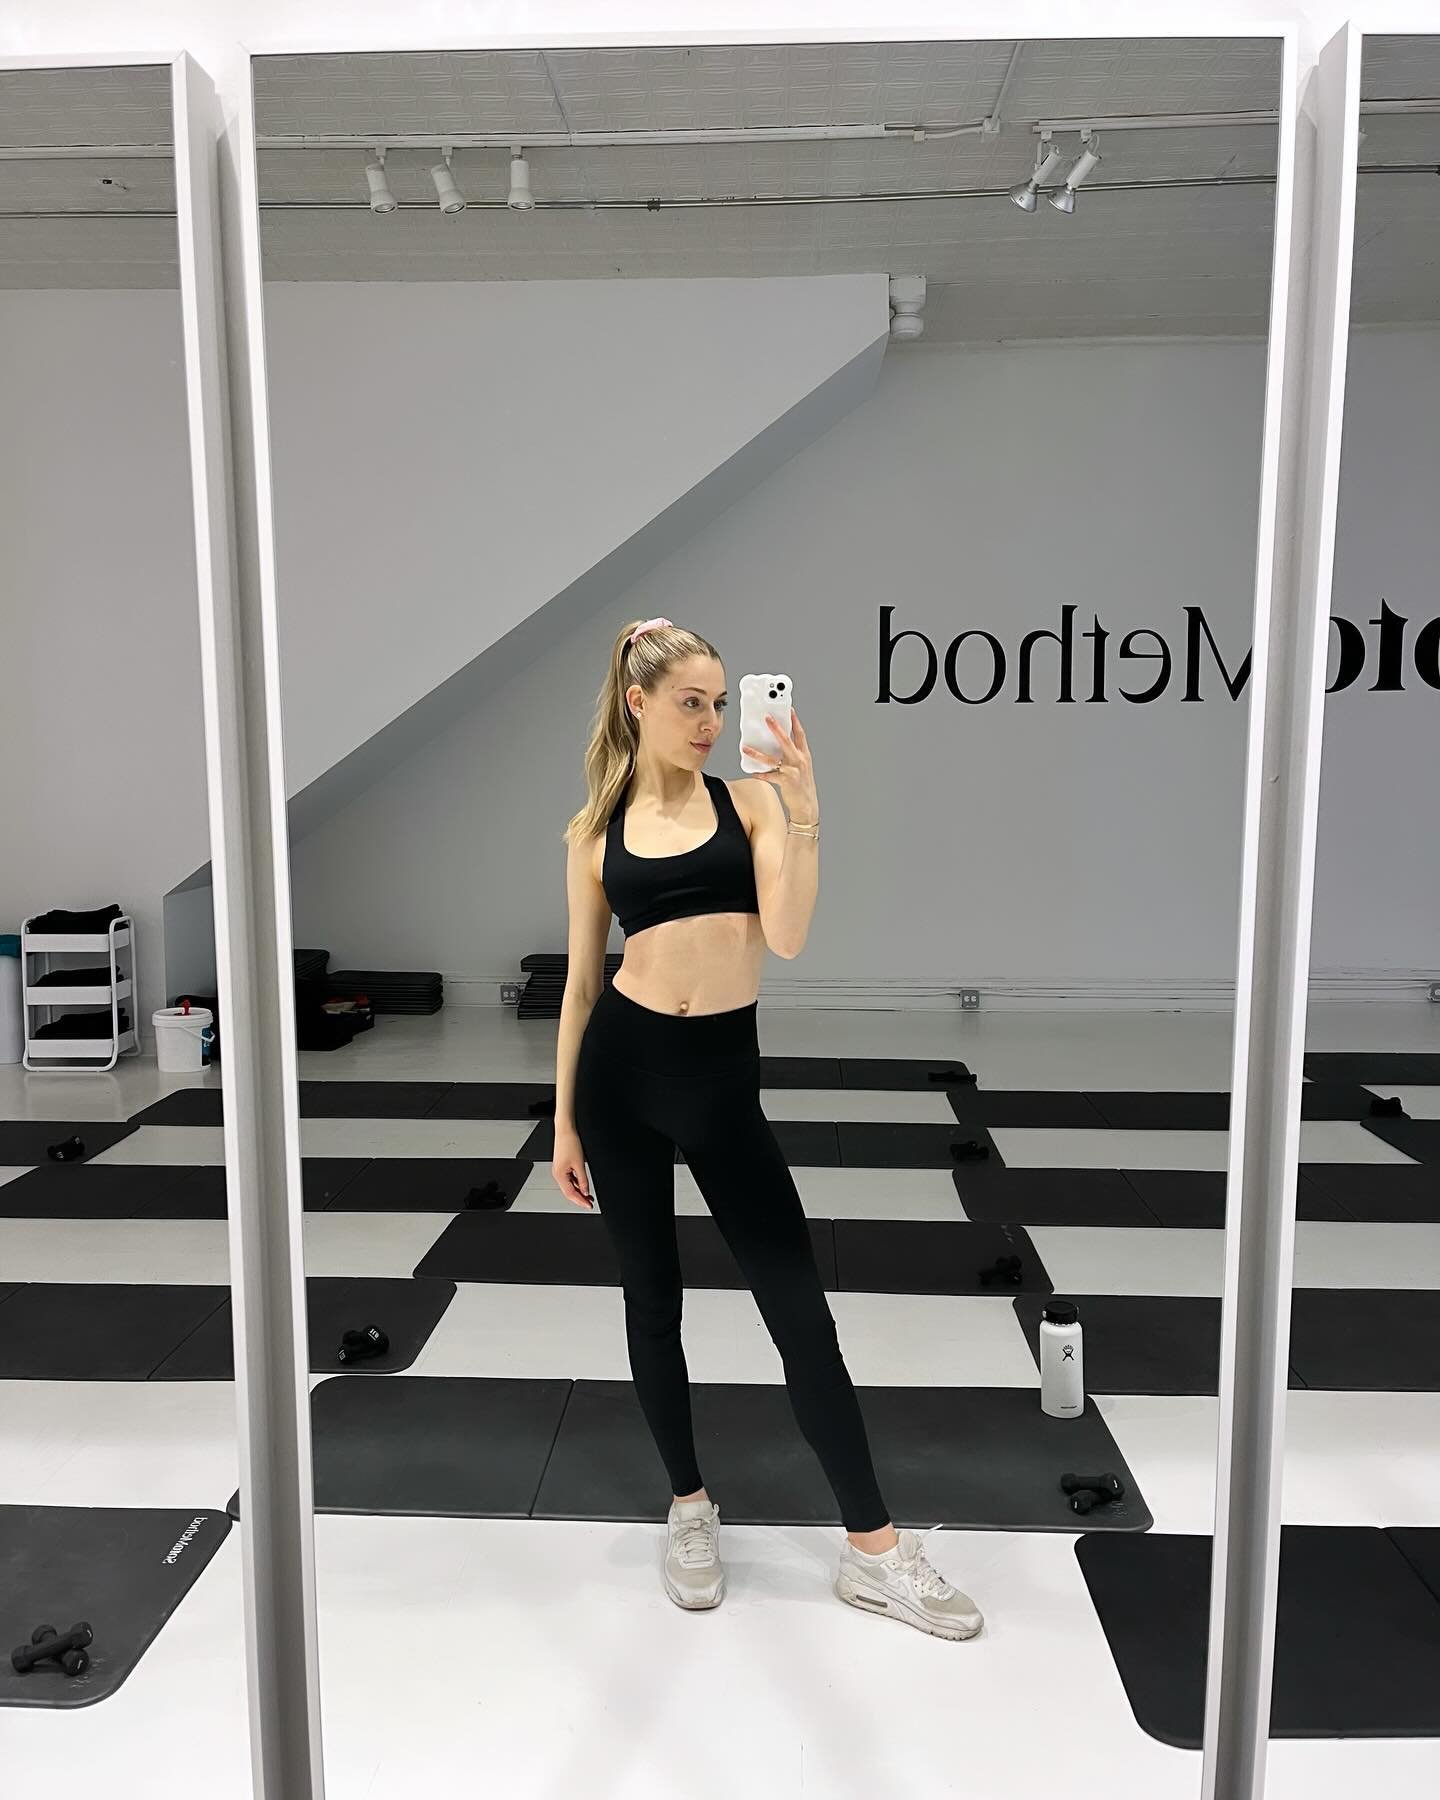 beauty and wellness recents 🤍

🖤 tried @sotomethod, the new it-girl workout class. @hoffhil is such a bright light. the class really pushed my limits and i felt so inspired and motivated 🤩 you can use the code &ldquo;emmajwalsh8157&rdquo; for $10 